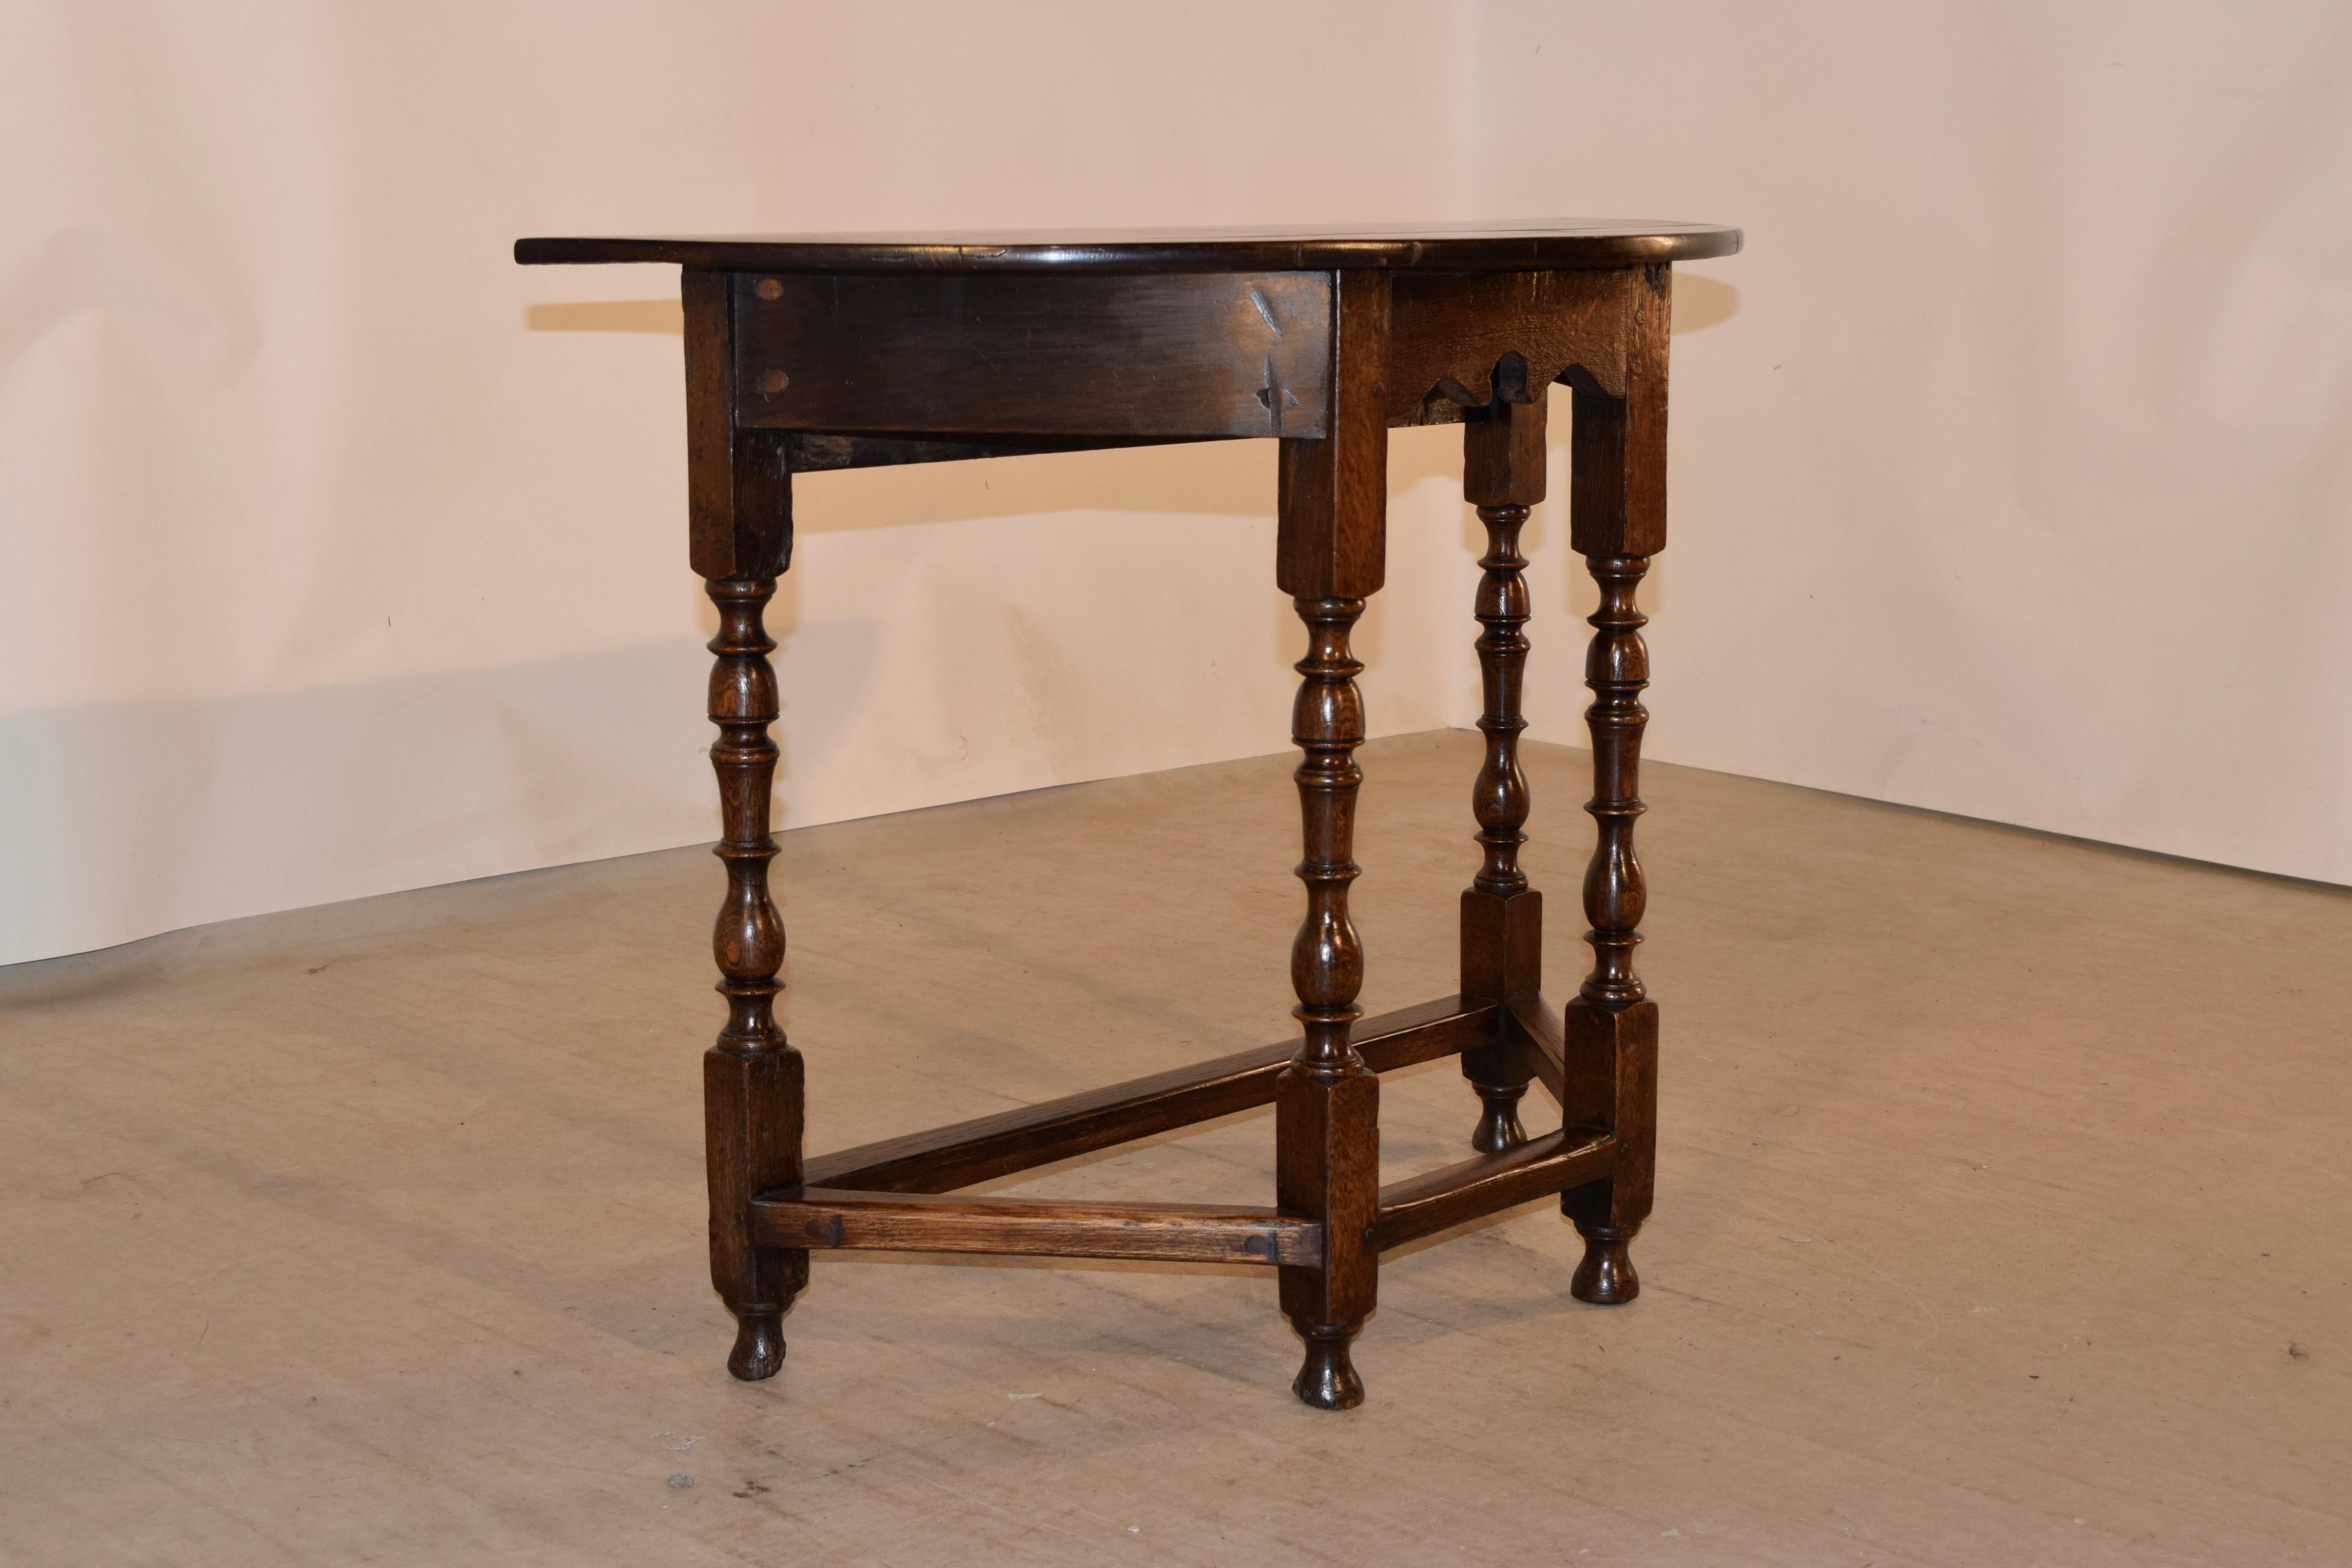 19th century oak demilune table from England. The top is made from planks and is pegged in construction, following down to a scalloped apron in the front and supported on wonderfully shaped hand turned legs, joined by simple stretchers and raised on